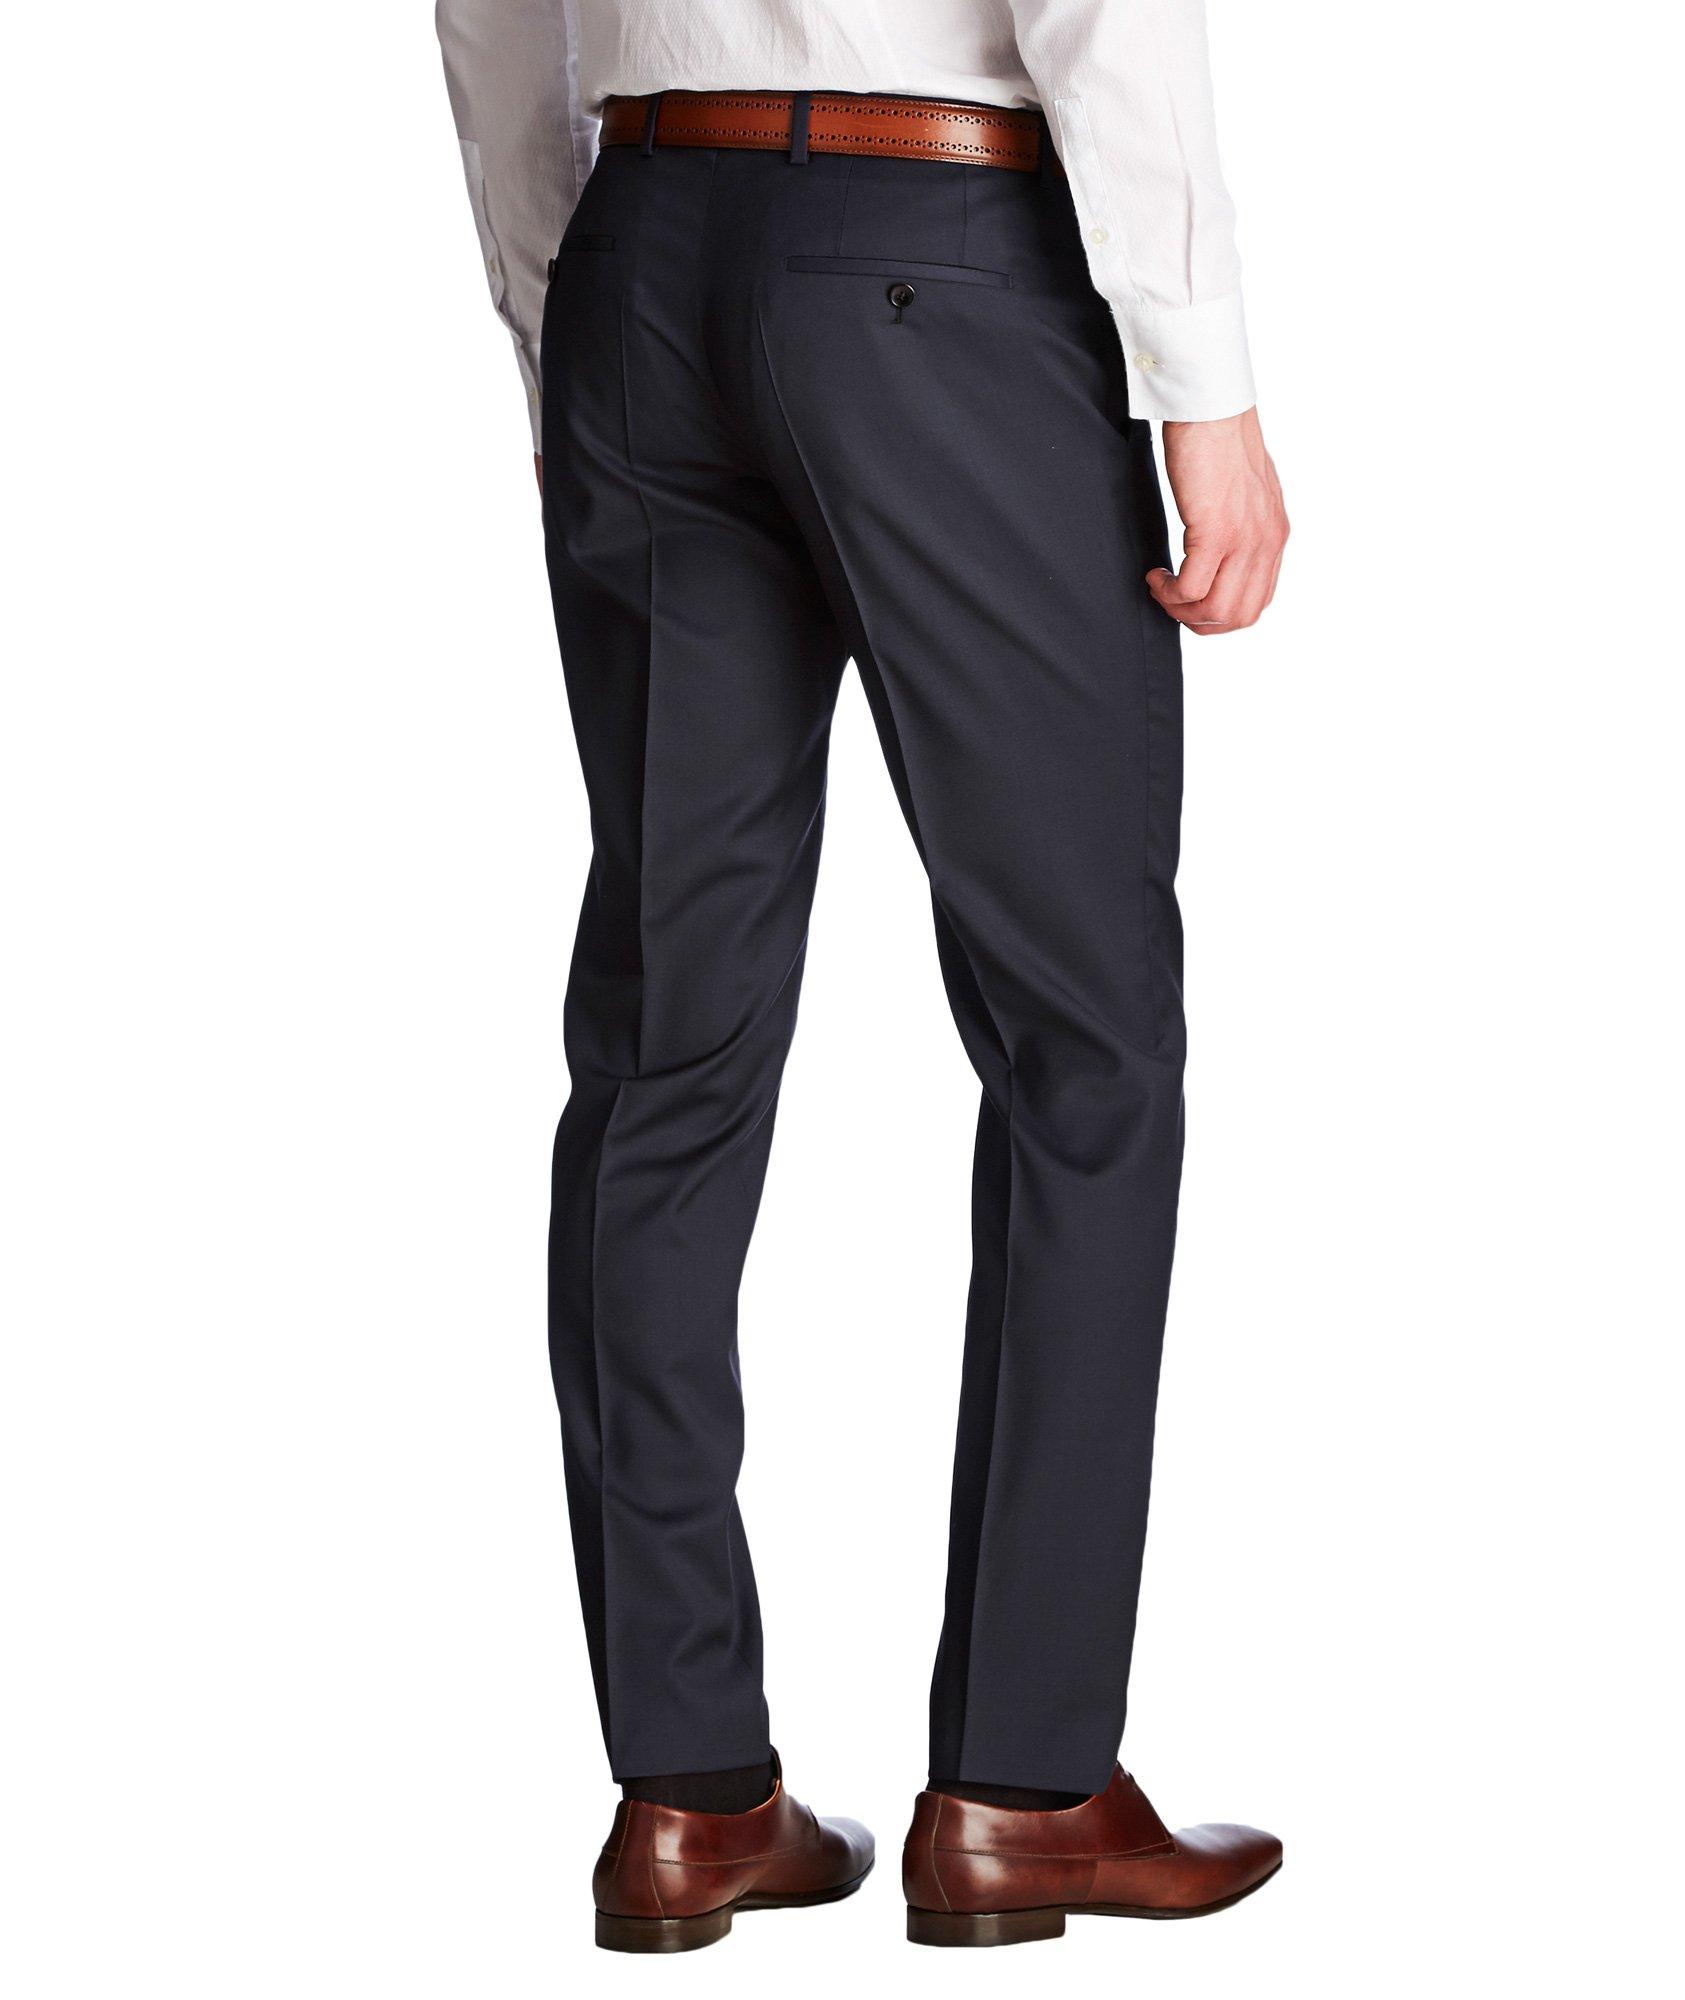 Gibson "Create Your Look" Dress Pants  image 1